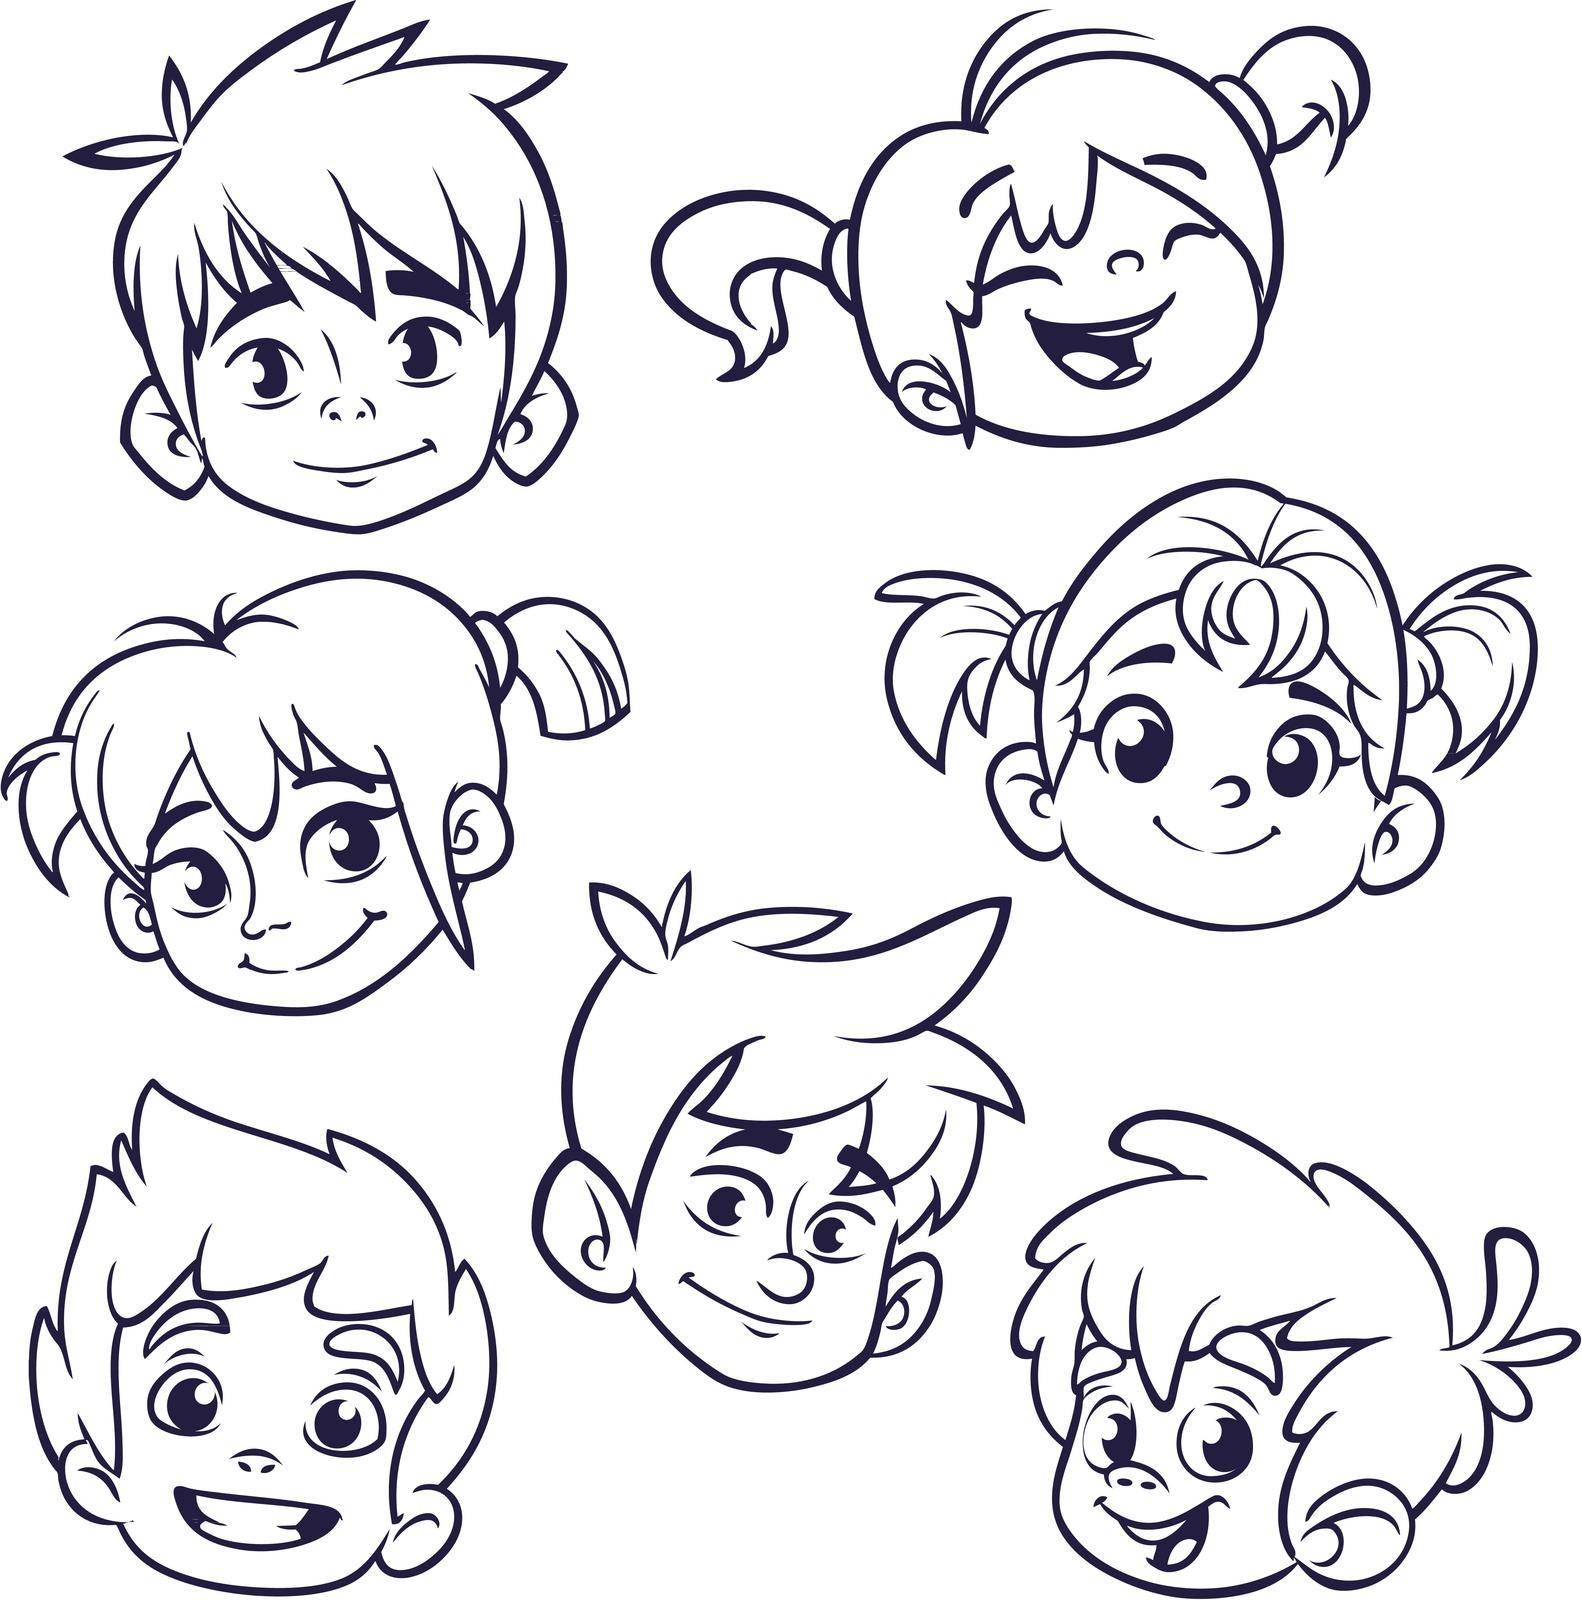 Cartoon child face icons. Vector set of childrens or teenagers heads outlined. Cutout illustration by drawkman